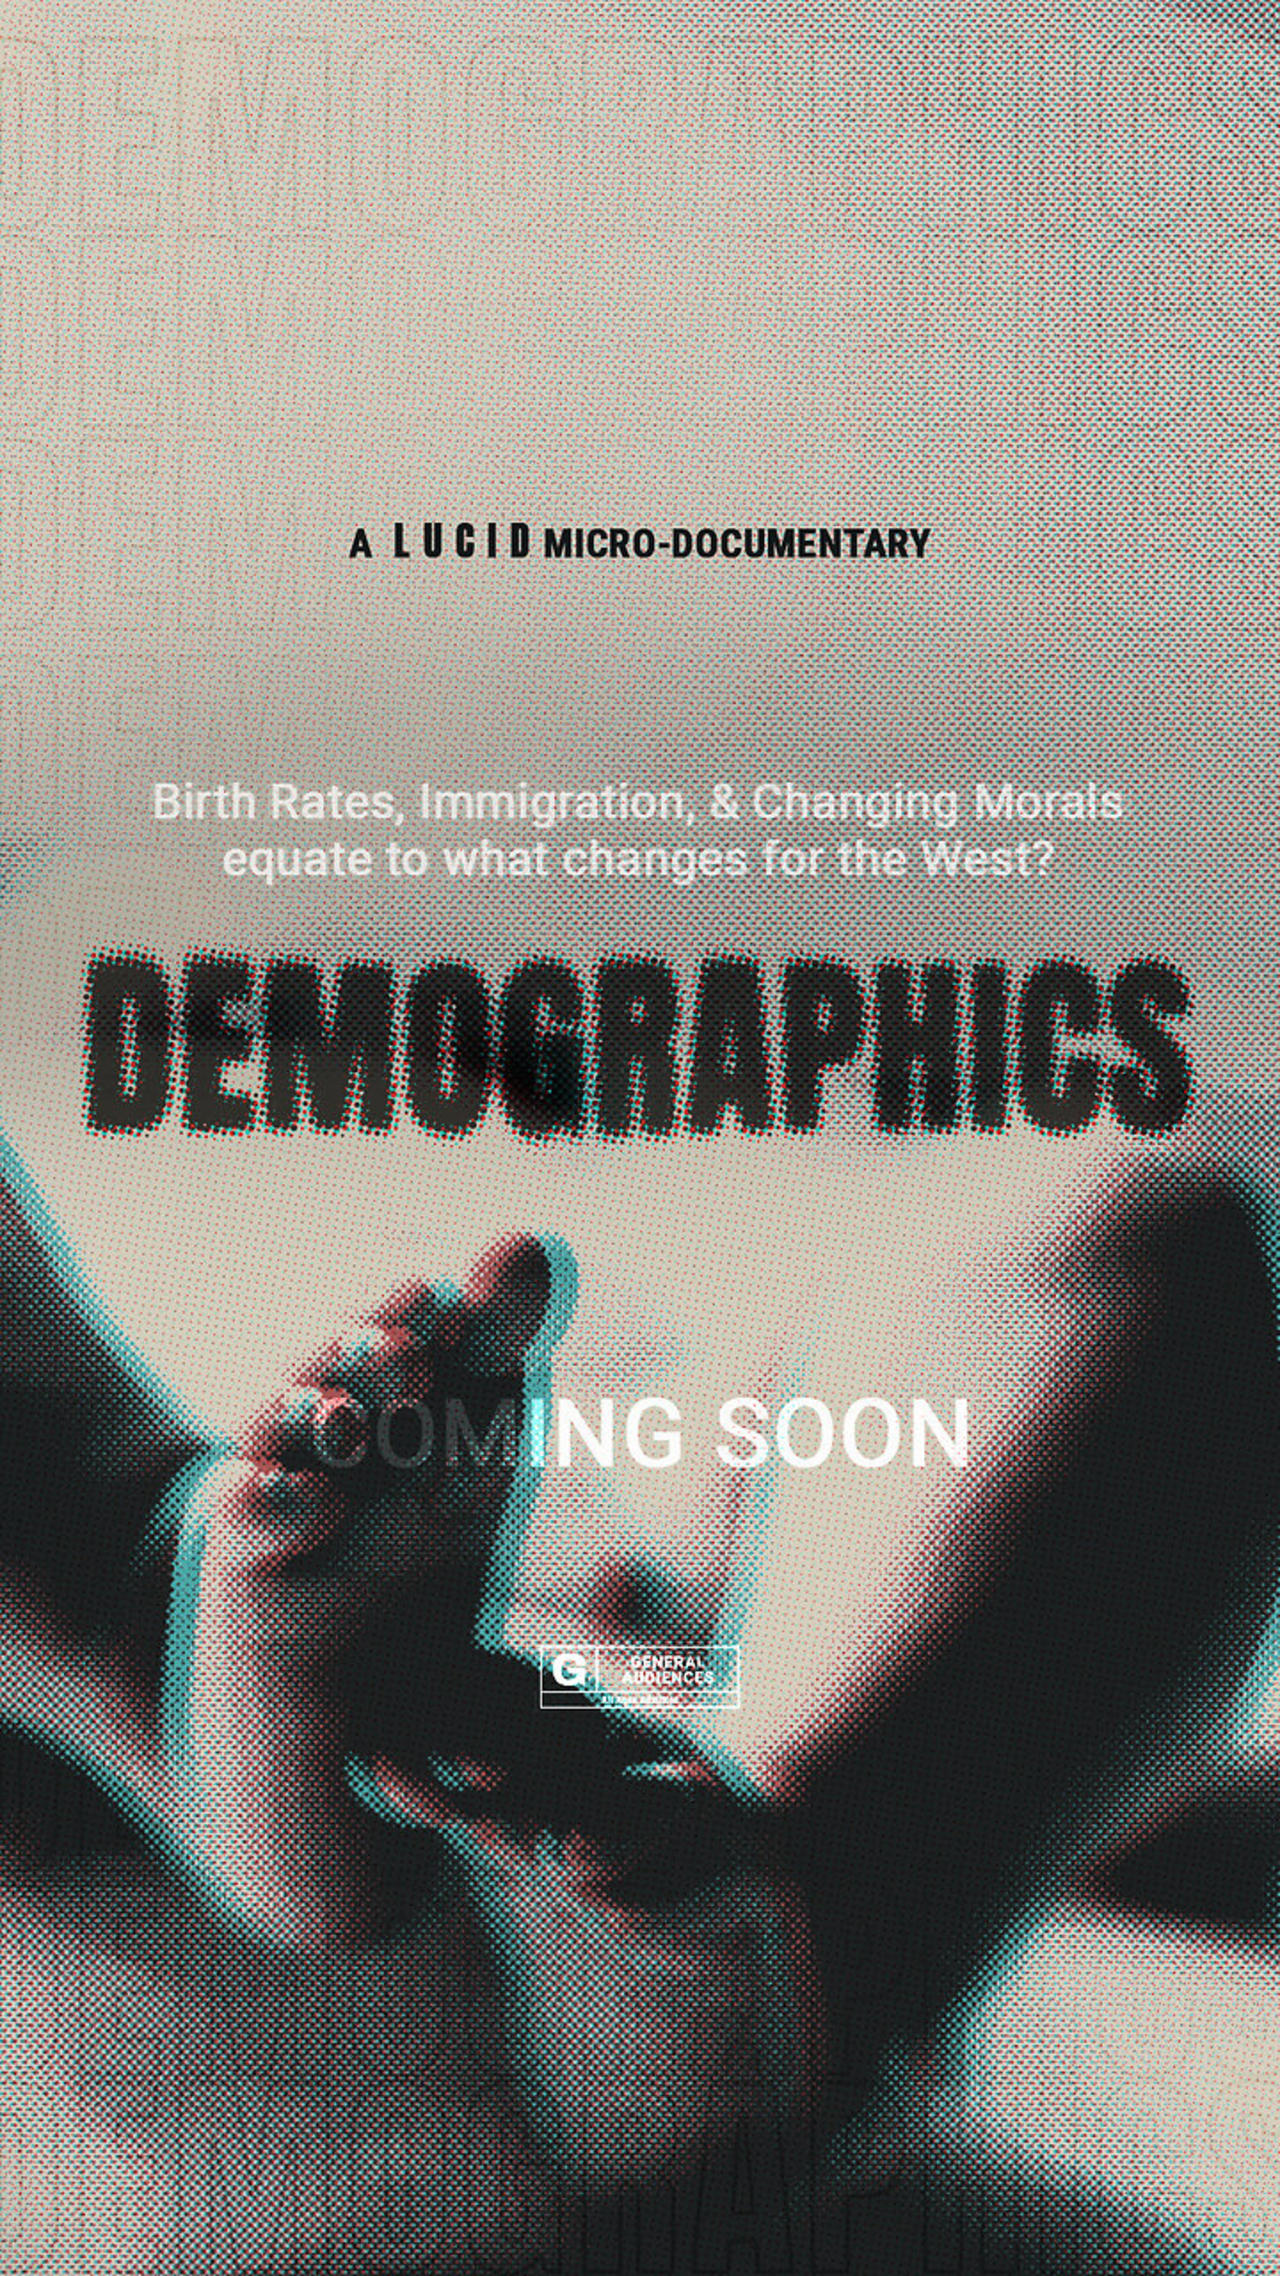 Lucid's first micro-documentary.. coming soon!